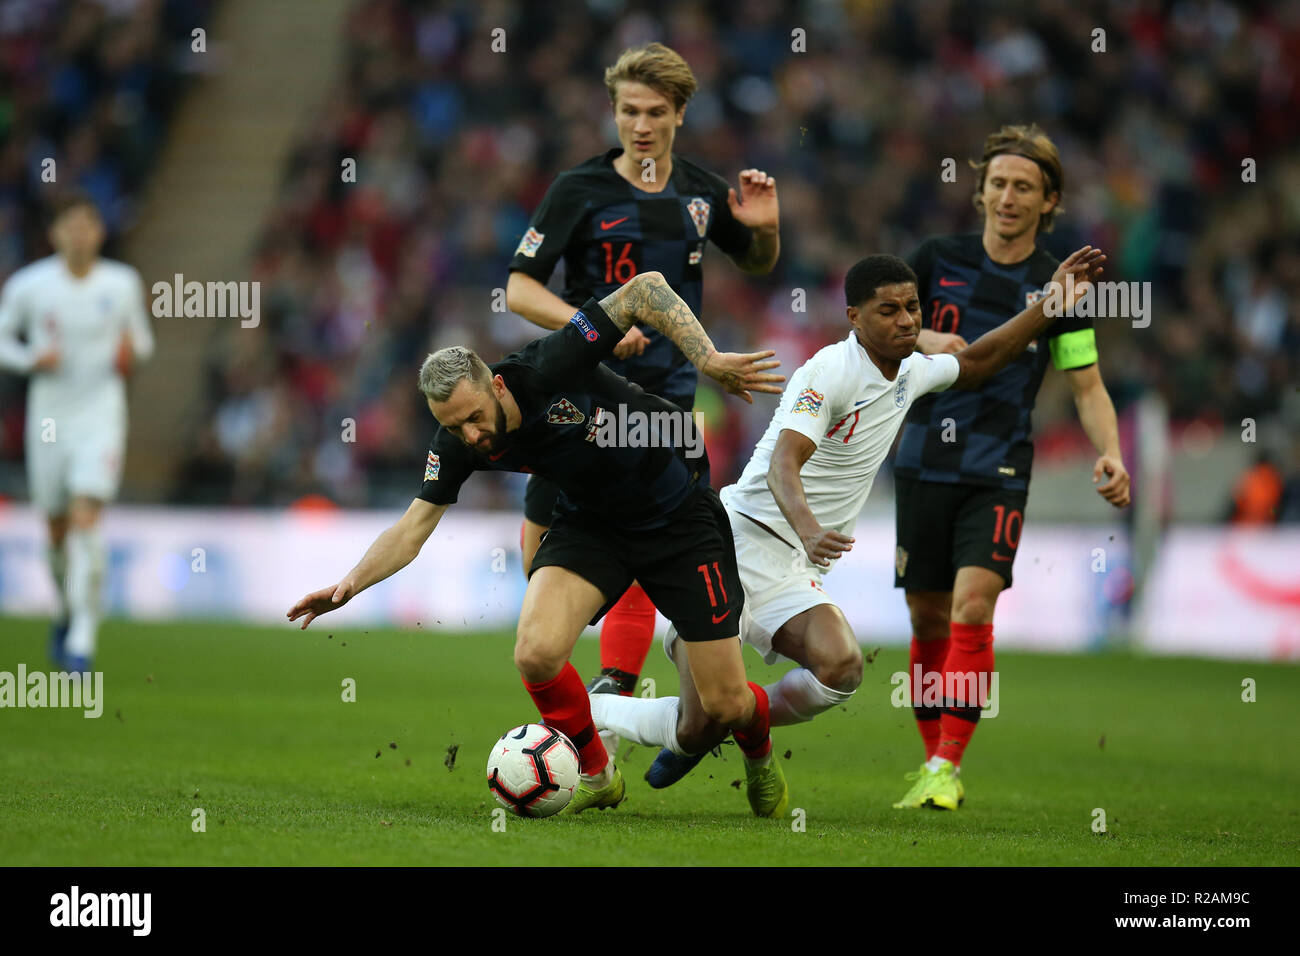 London, UK. 18th November 2018. London, UK. 18th November 2018. London, UK. 18th November 2018. London, UK. 18th November 2018.Marcus Rashford of England is blocked and fouled by Croatia's Marcelo Brozovic (l) and Tin Rebic (16).UEFA Nations league A, group 4 match, England v Croatia at Wembley Stadium in London on Sunday 18th November 2018.  Please note images are for Editorial Use Only. pic by Andrew Orchard/Alamy Live news Credit: Andrew Orchard sports photography/Alamy Live News Credit: Andrew Orchard sports photography/Alamy Live News Stock Photo